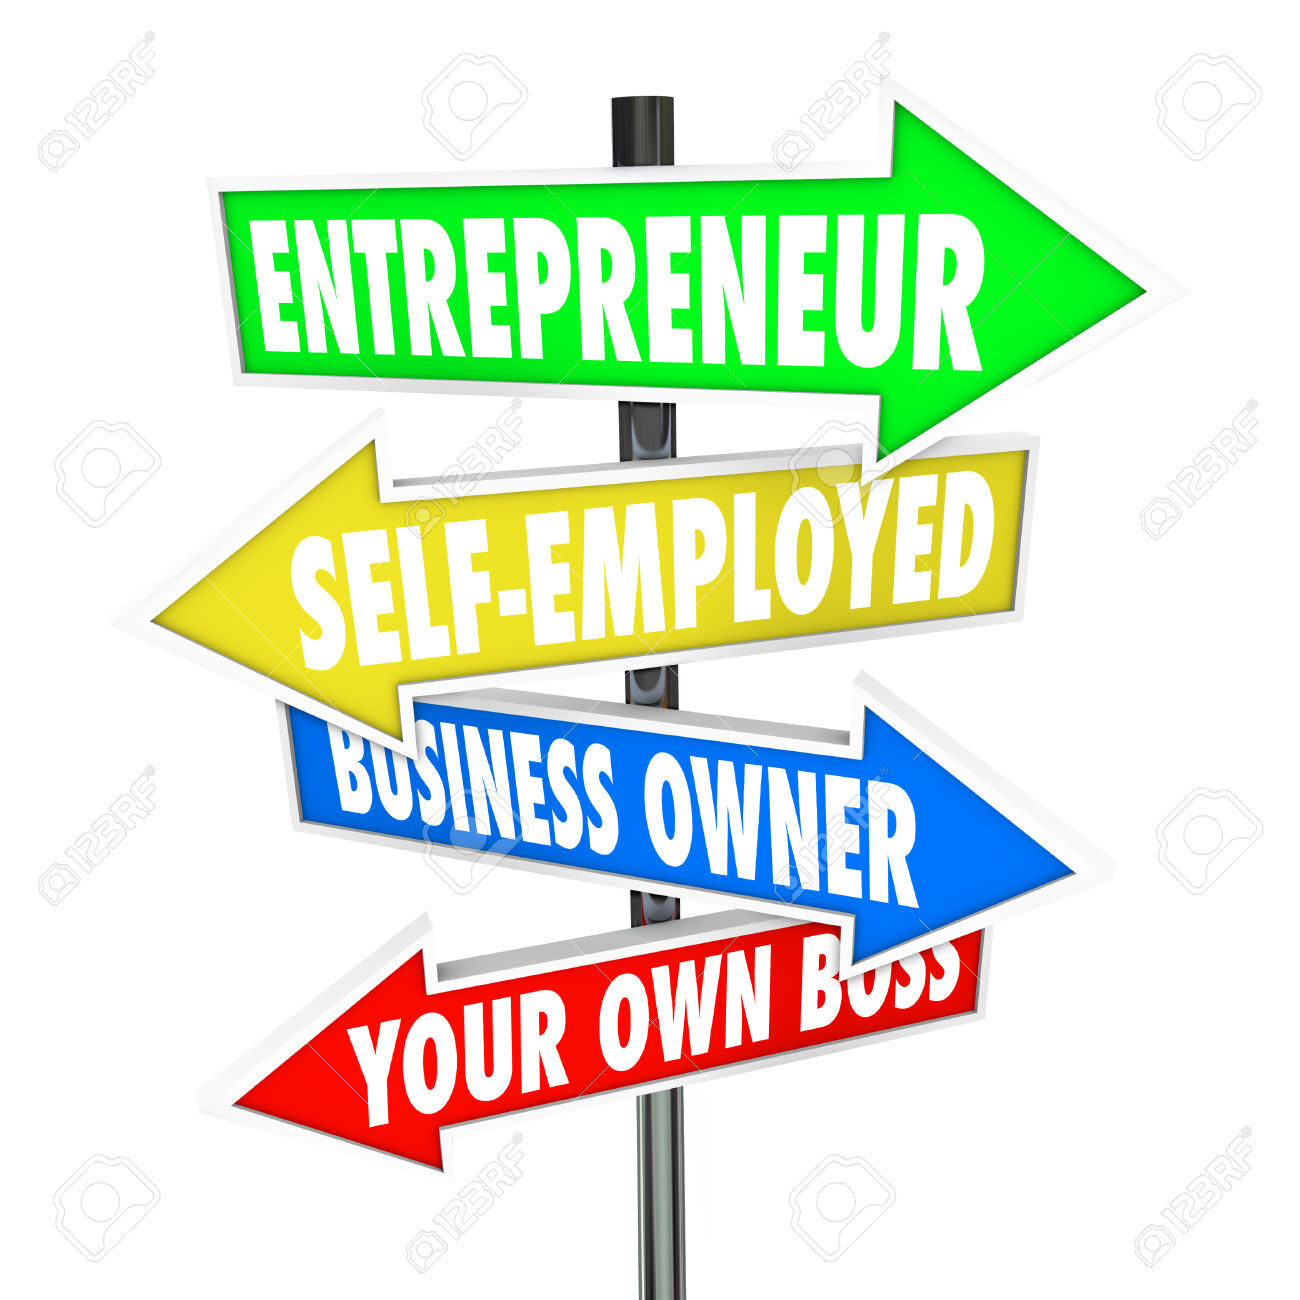 Entrepreneur, self-employed, business owner and your own boss words on road or street signs with arrows pointing you to success running your own company and controling your destiny